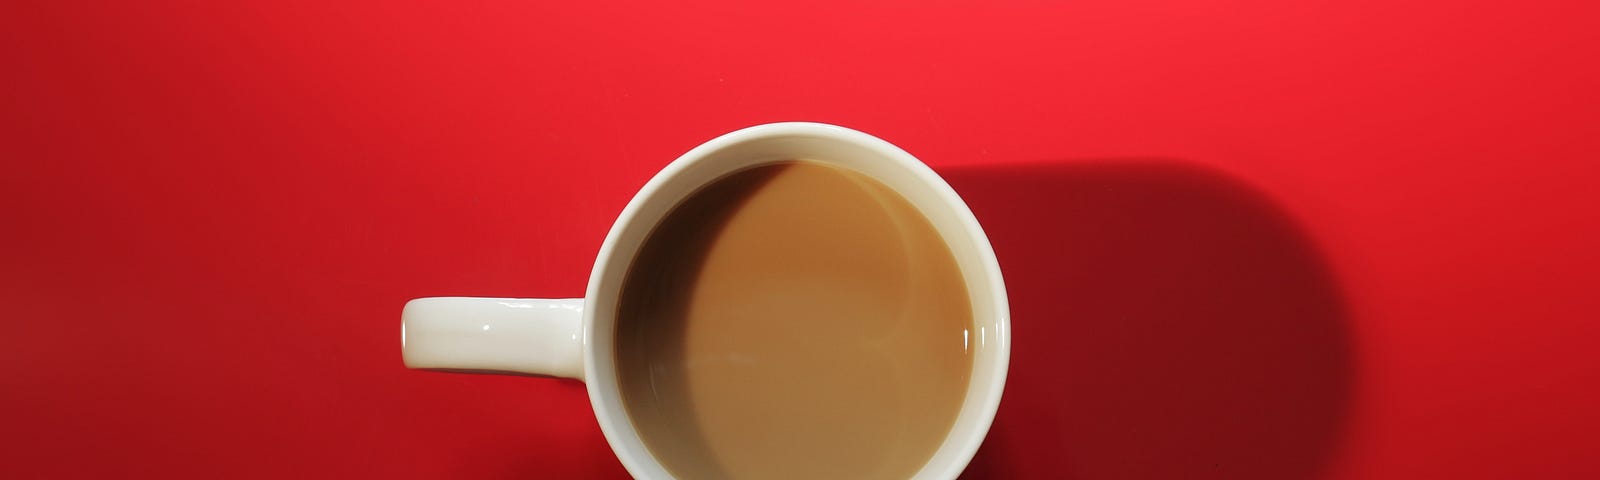 A cup of coffee with cream in a white mug viewed from above casts a shadow on a bright red background.